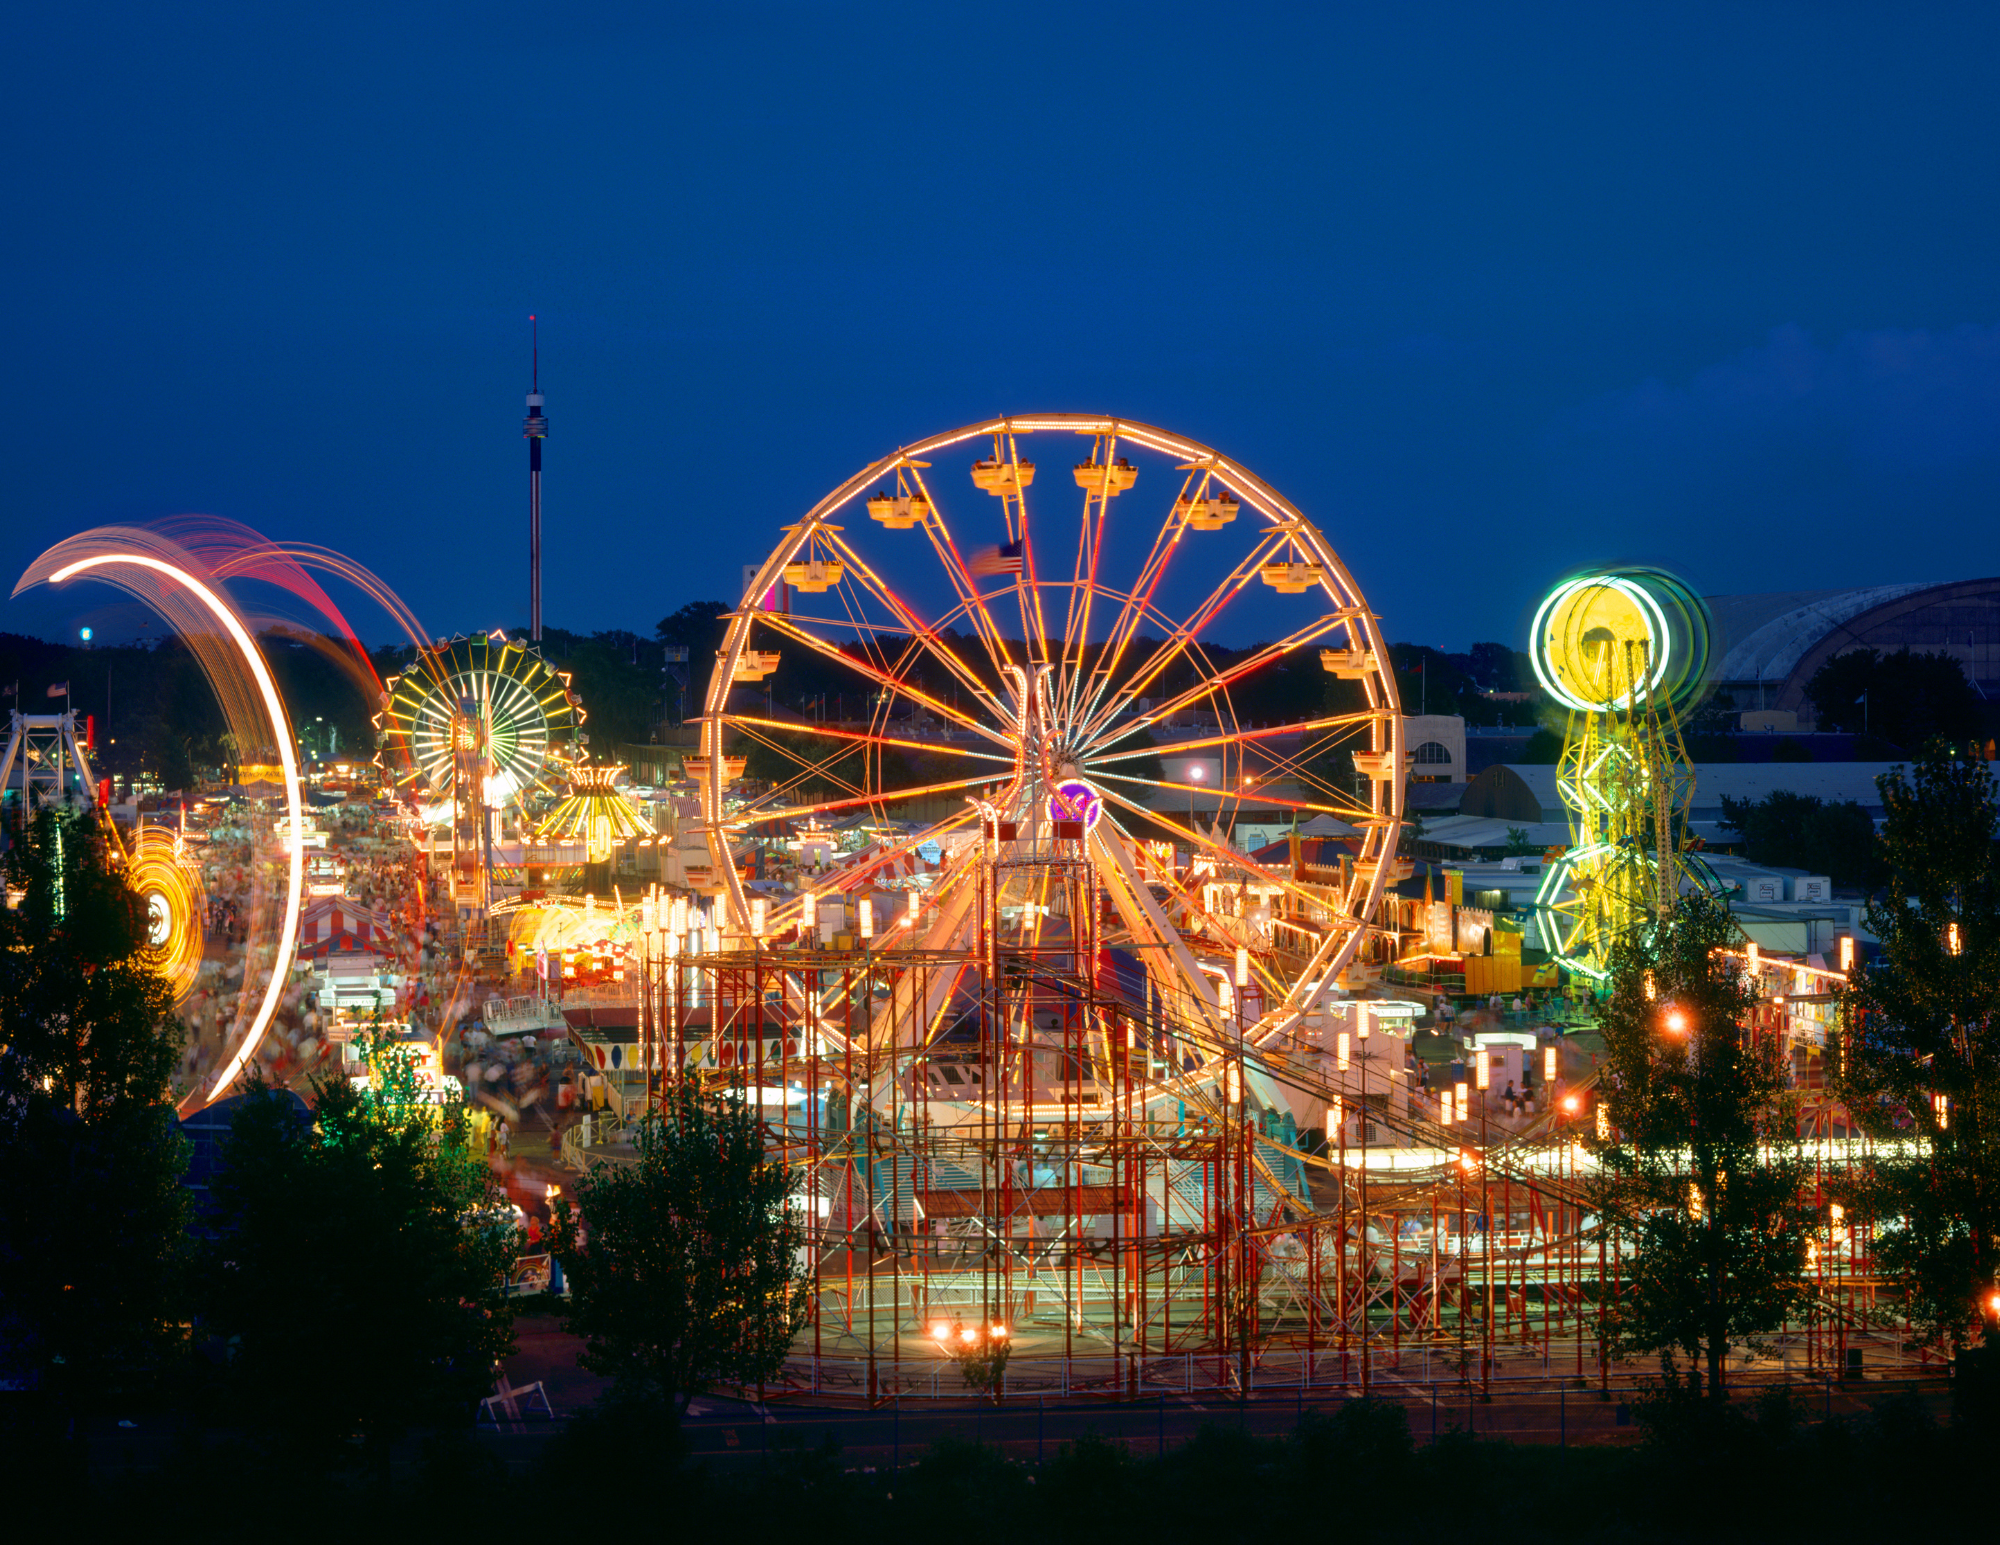 Don't Spend All Your Money at the Tri-State Fair: Invest in Your Future with Homeownership